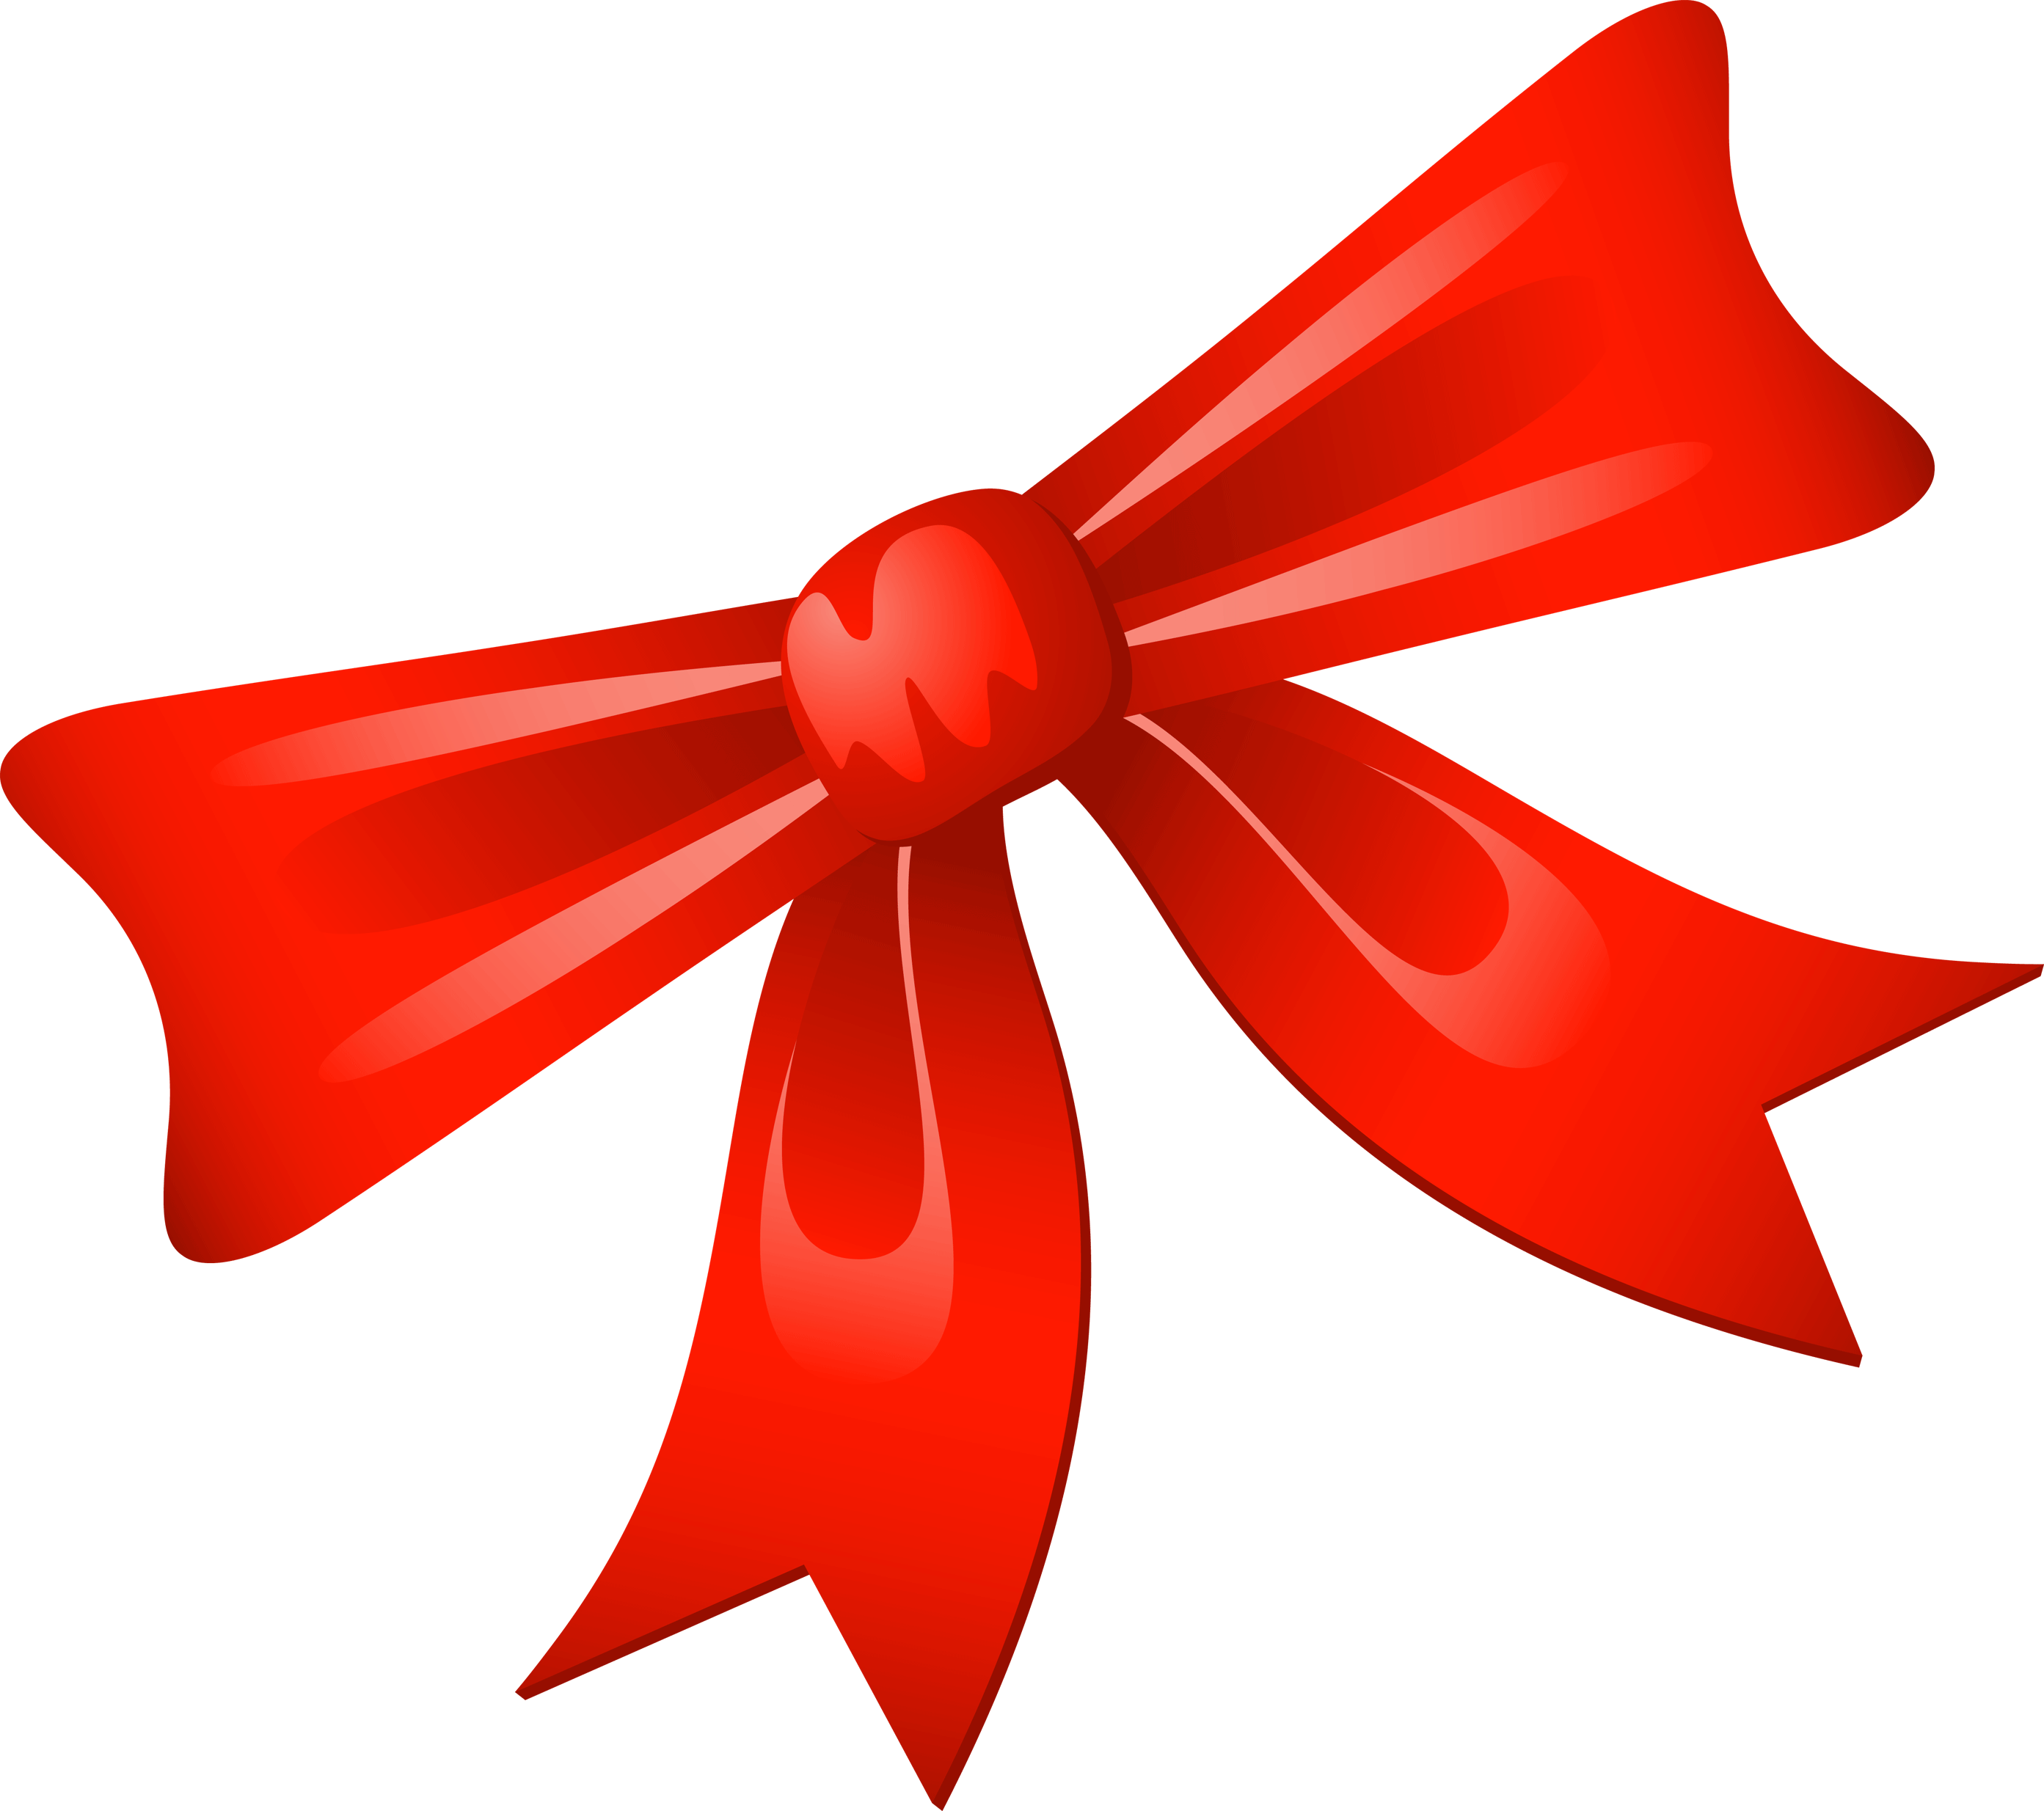 Red bow PNG image